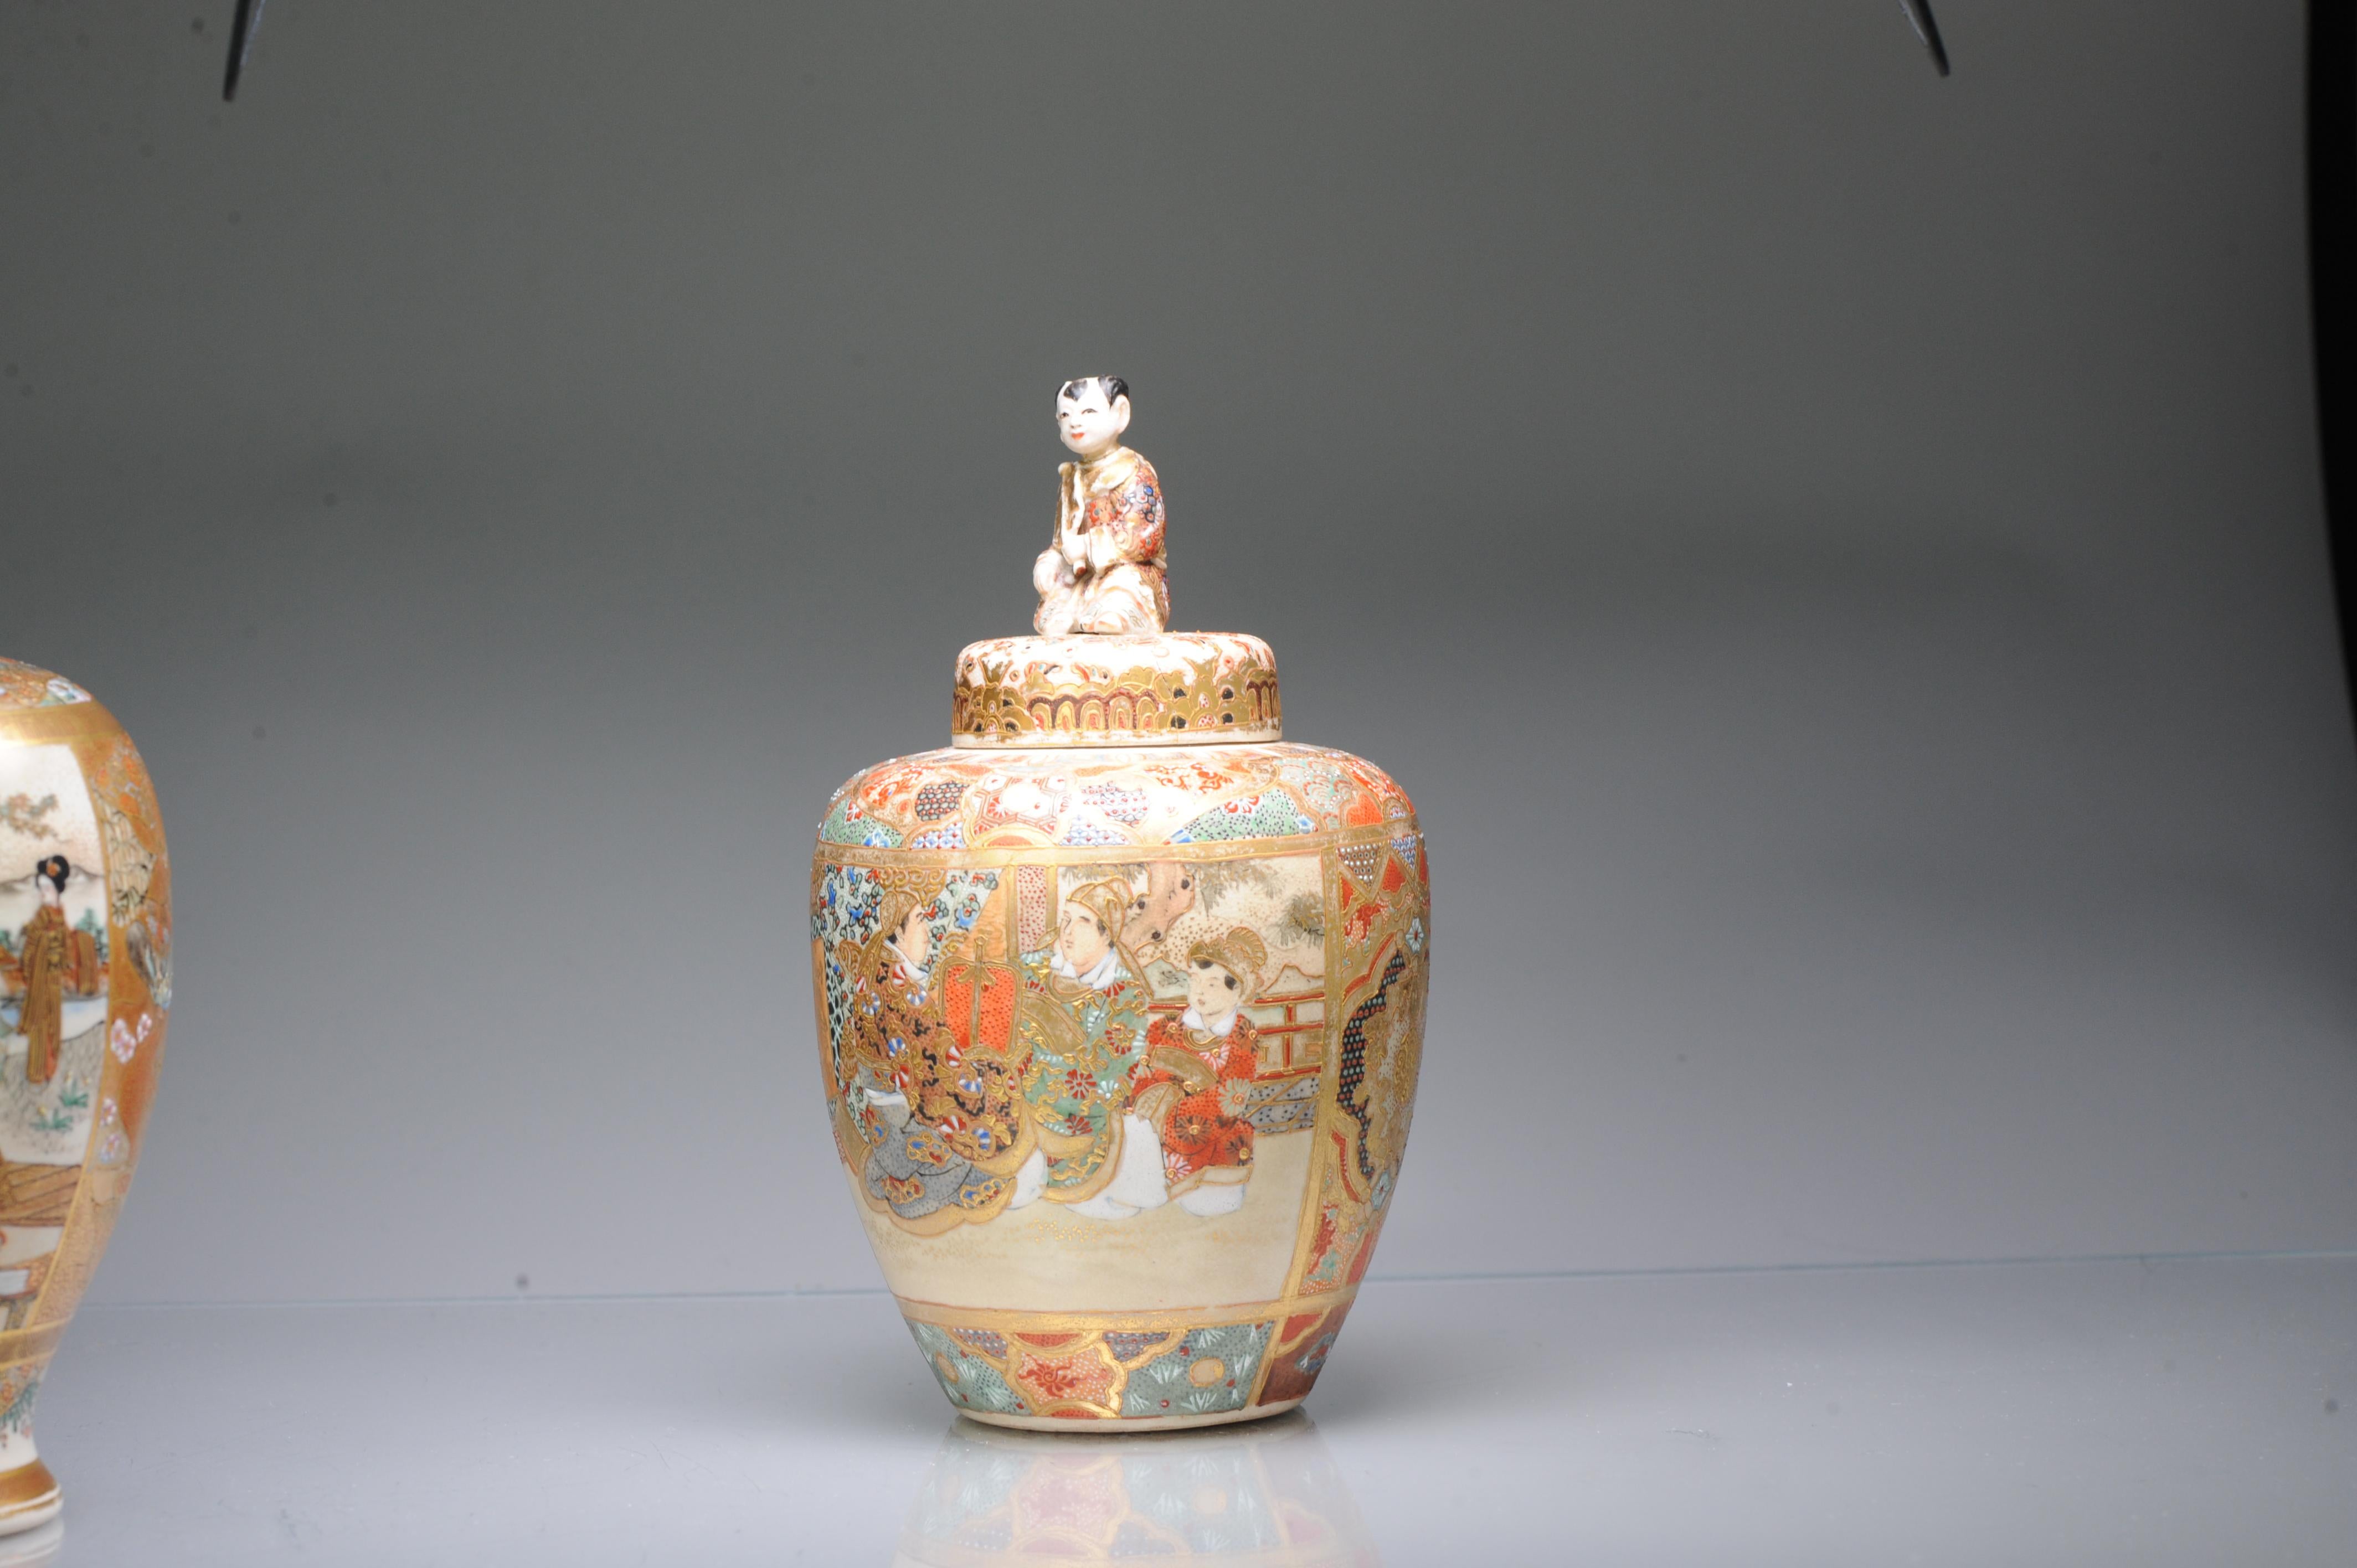 Meiji Antique Ca 1900 Japanese Satsuma Jar with Figures Richly Decorated Unmarked For Sale